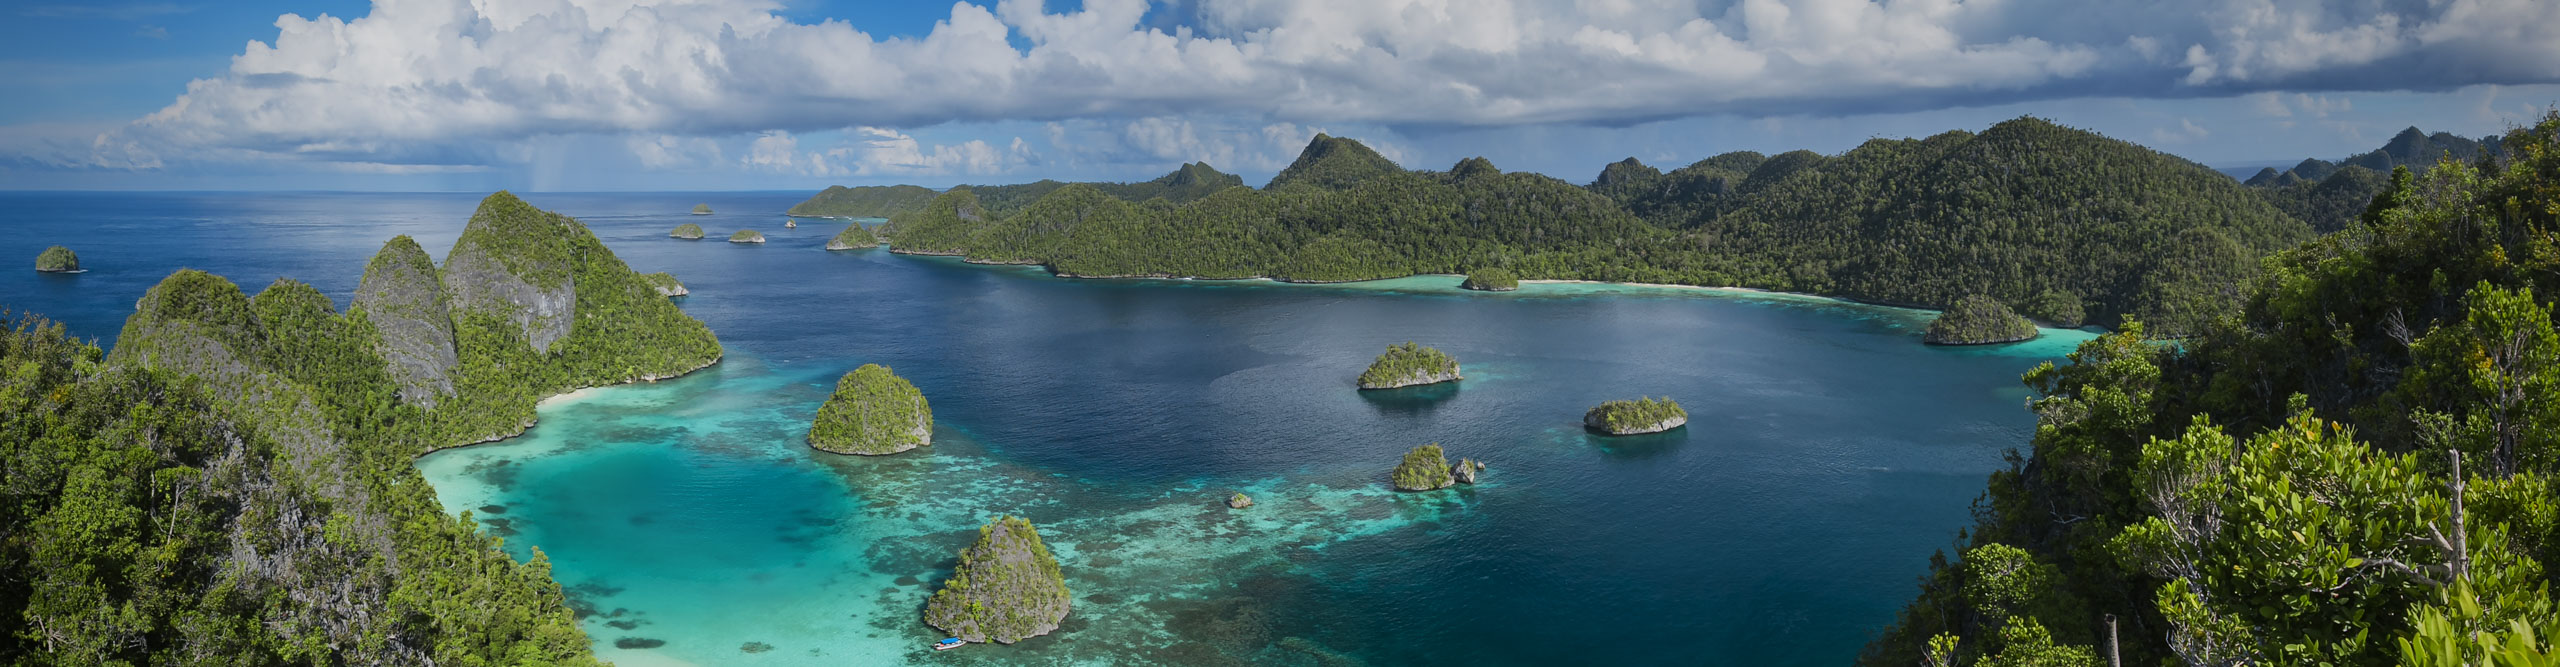 Panorama of the marine reserve Raja Ampat in Papua New Guinea,with deep blue ocean and blue sky